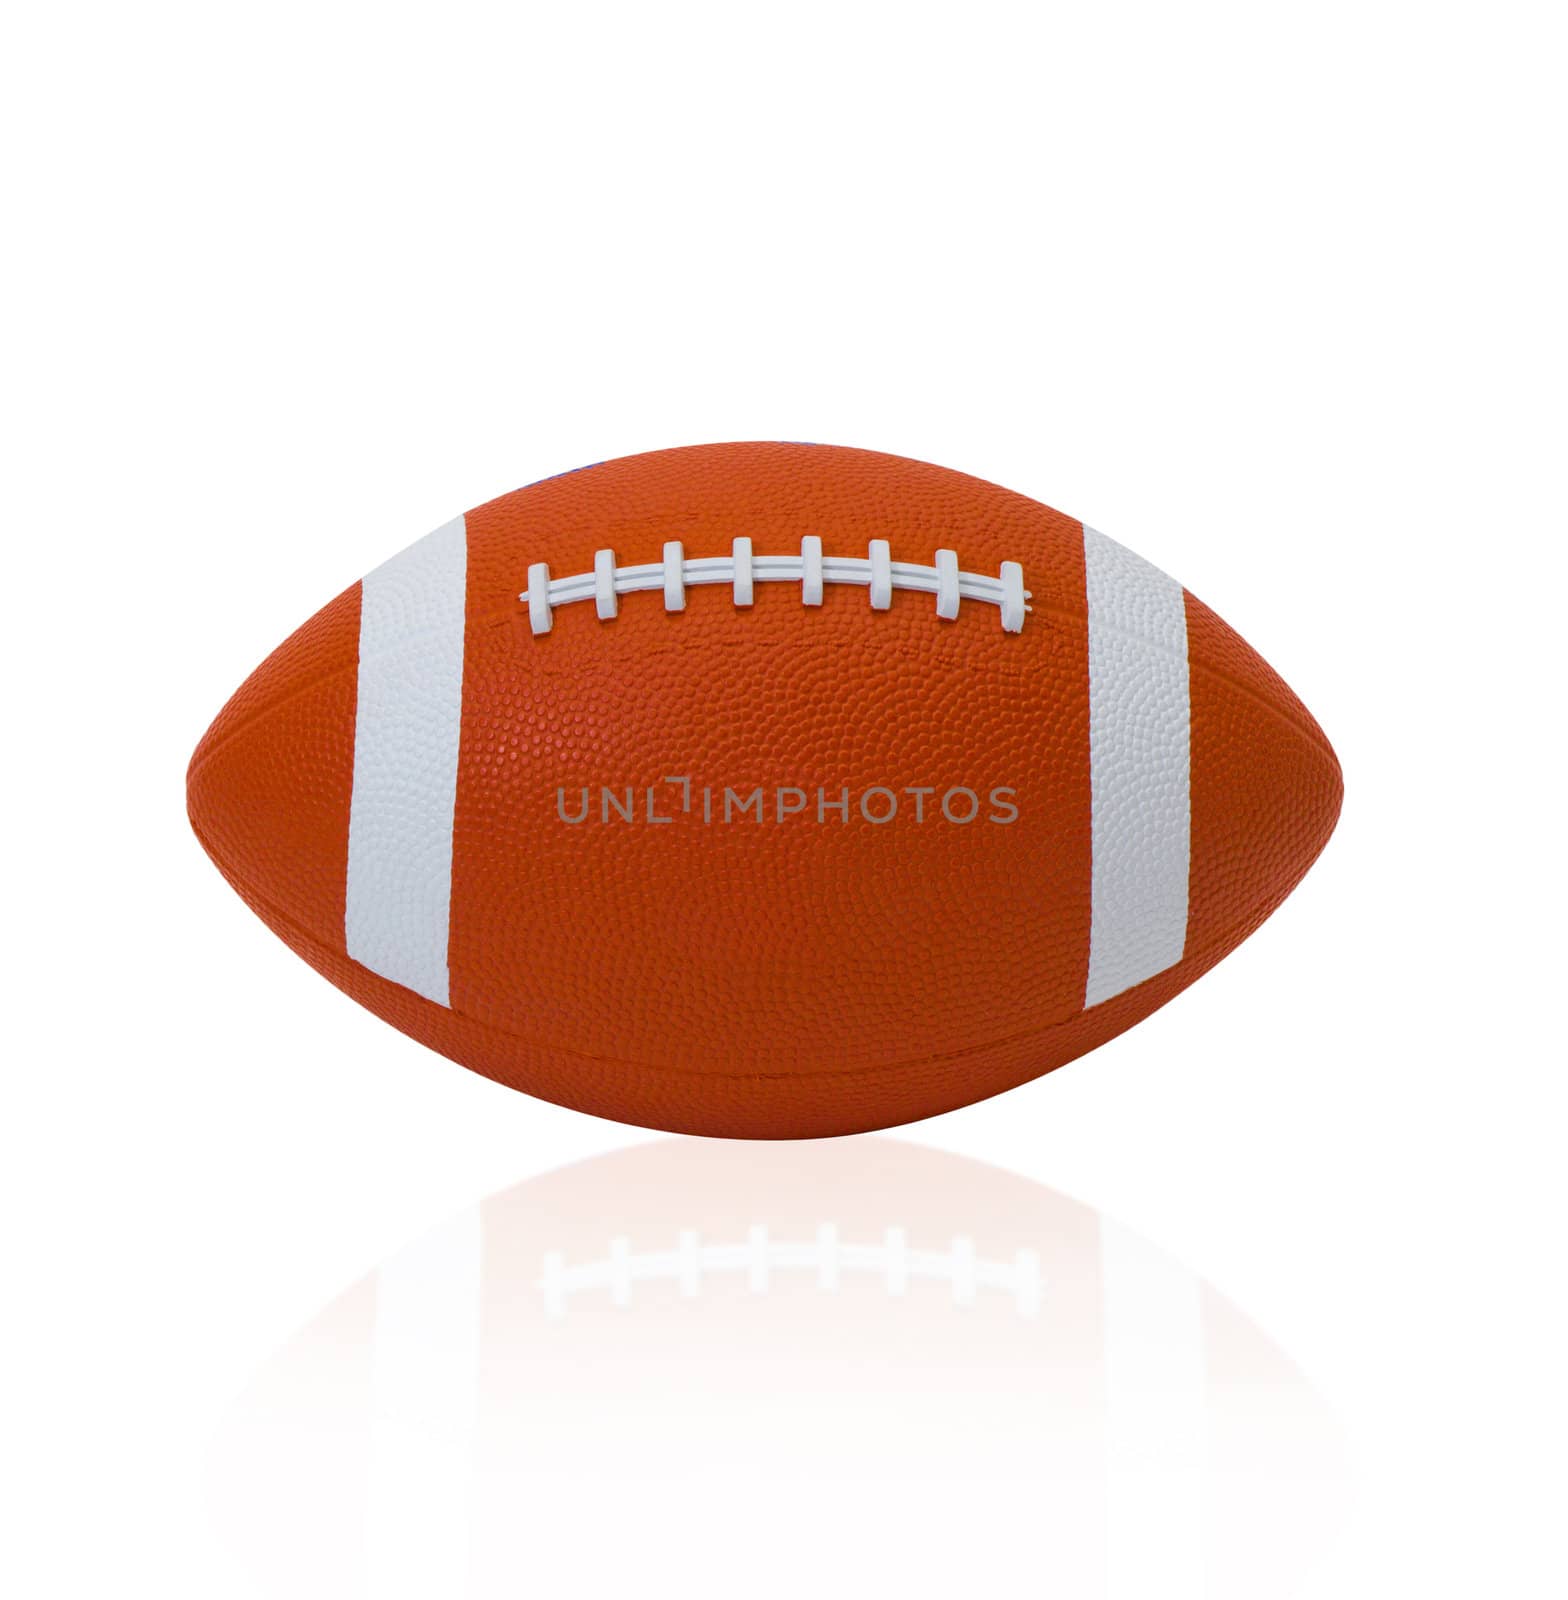 American football the most popular sport games in the United states